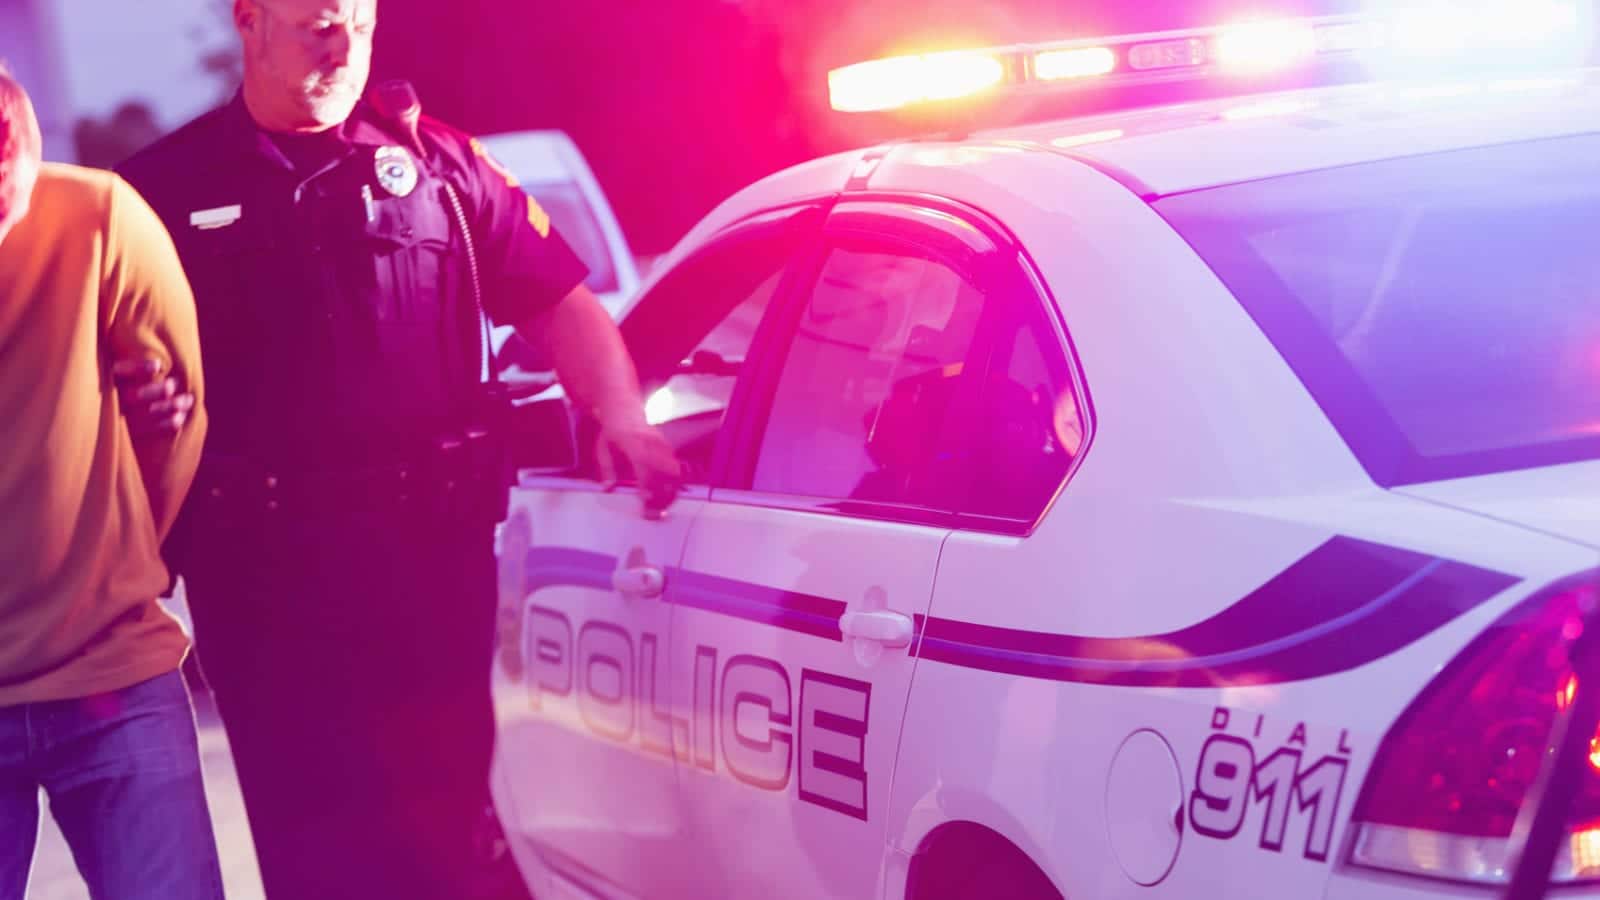 Police Officer Making An Arrest Stock Photo